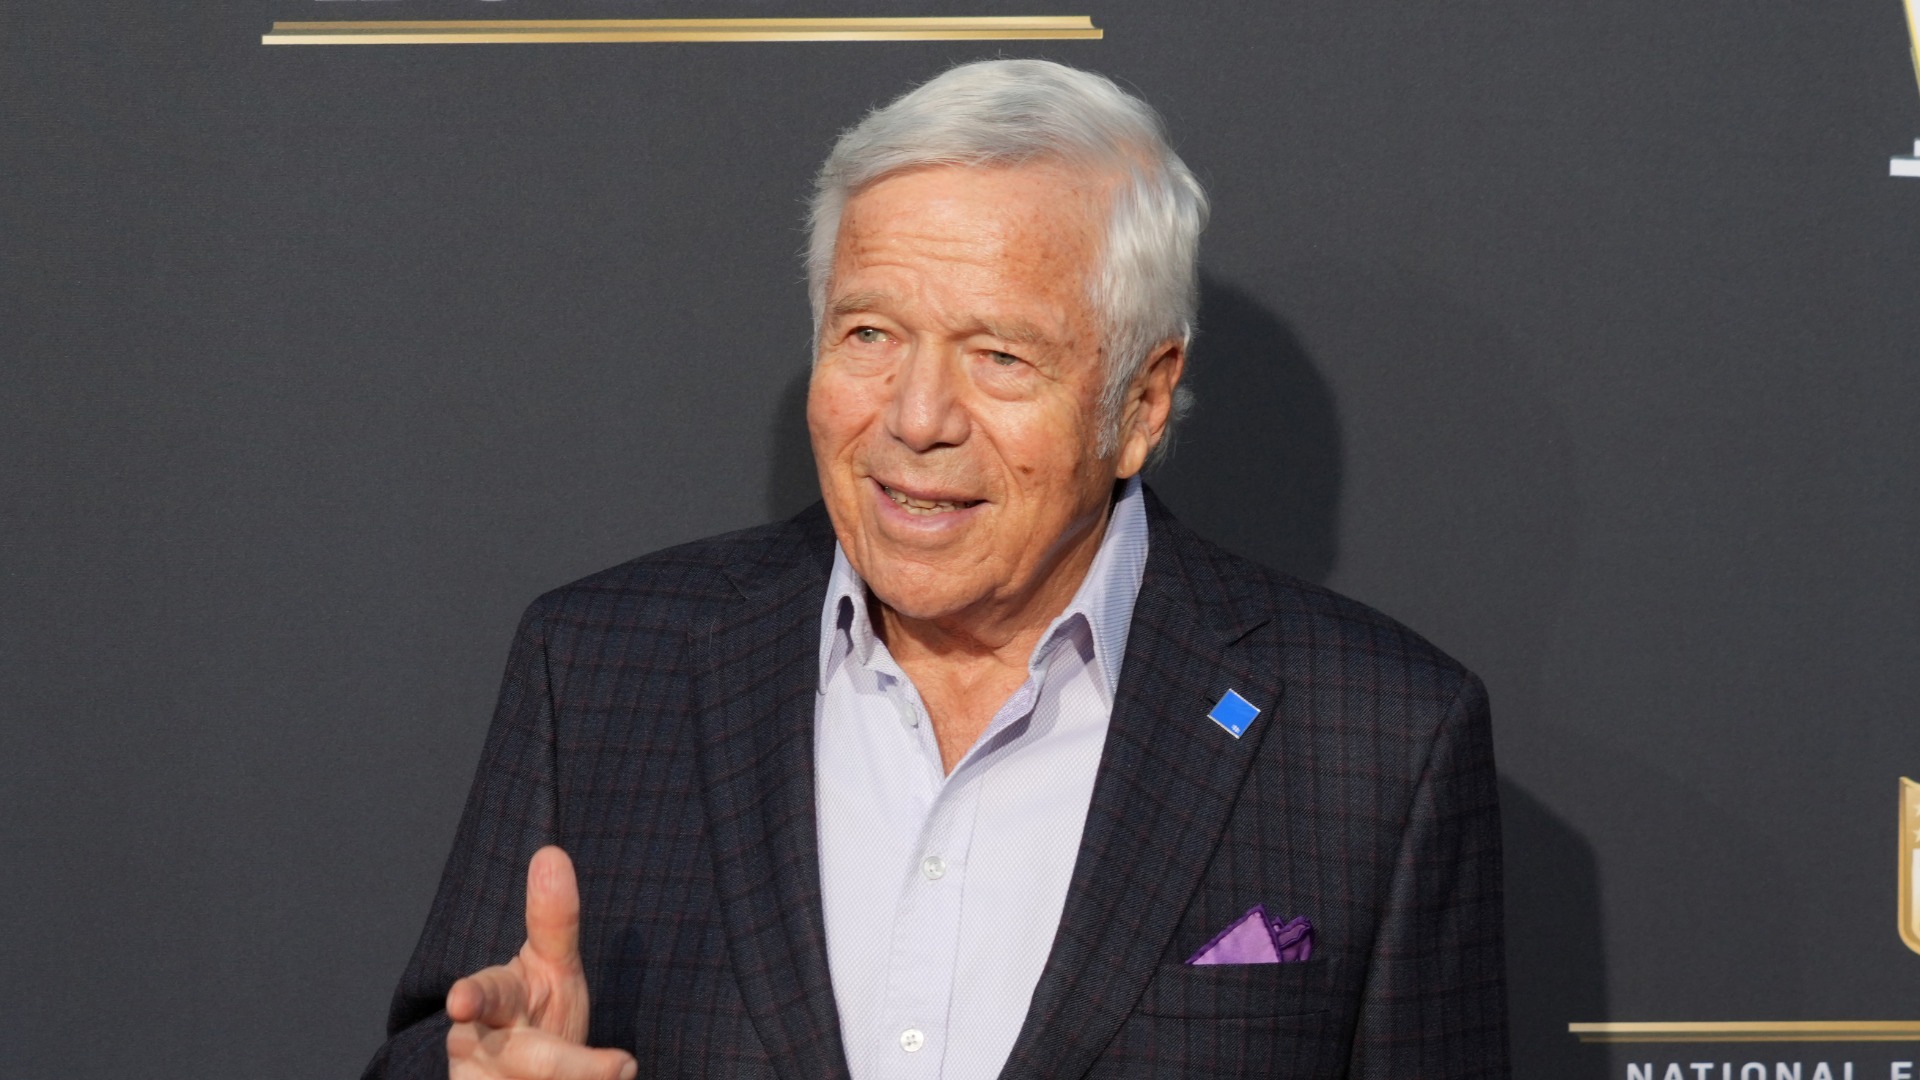 Robert Kraft Deflects When Asked About Bill Belichick’s Portrayal In
‘The Dynasty’